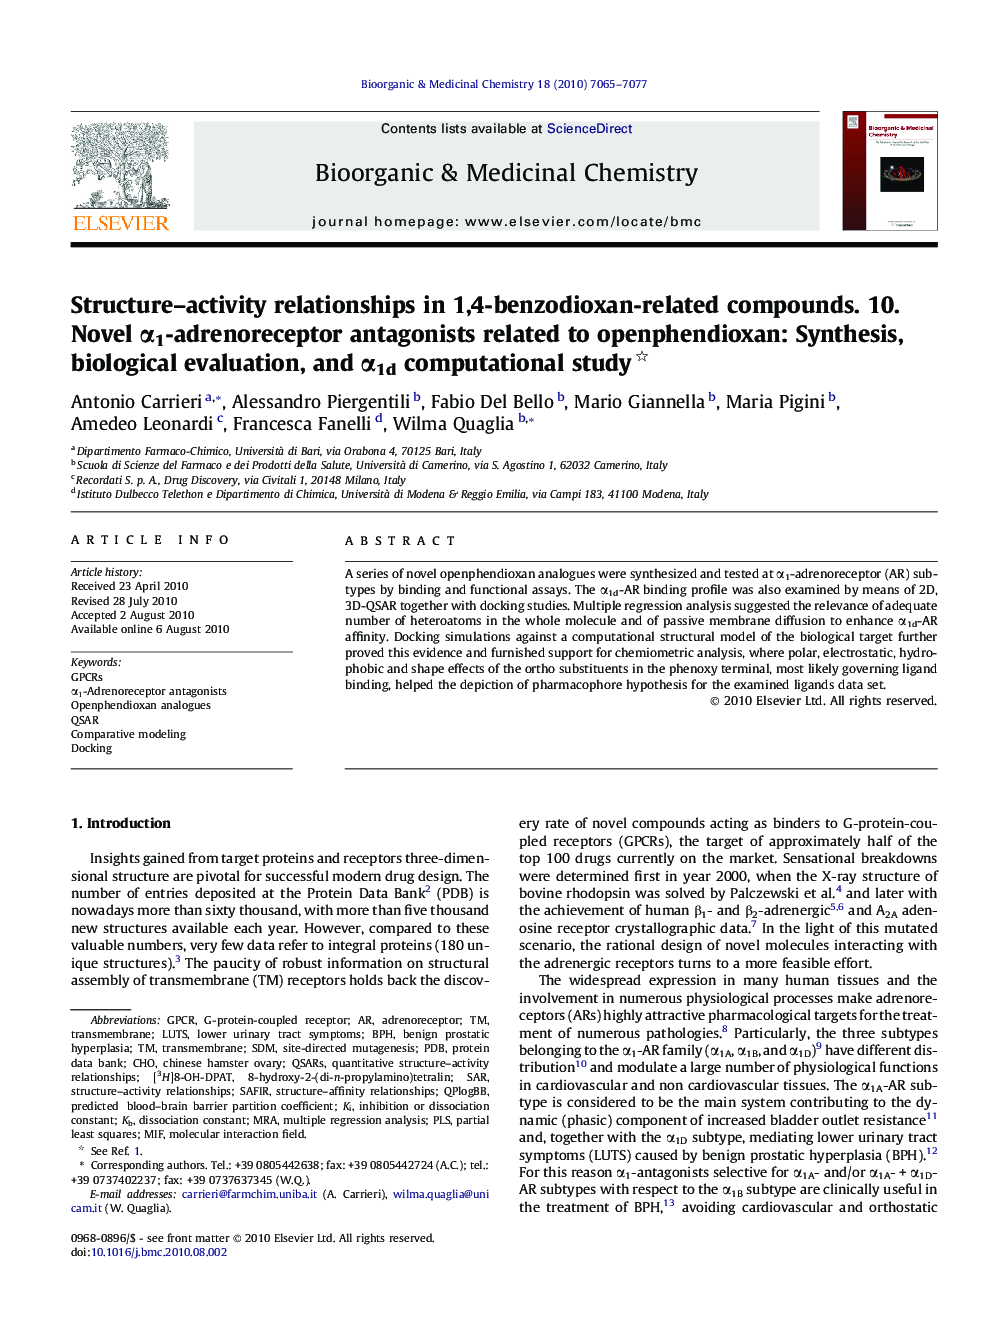 Structure–activity relationships in 1,4-benzodioxan-related compounds. 10. Novel α1-adrenoreceptor antagonists related to openphendioxan: Synthesis, biological evaluation, and α1d computational study 